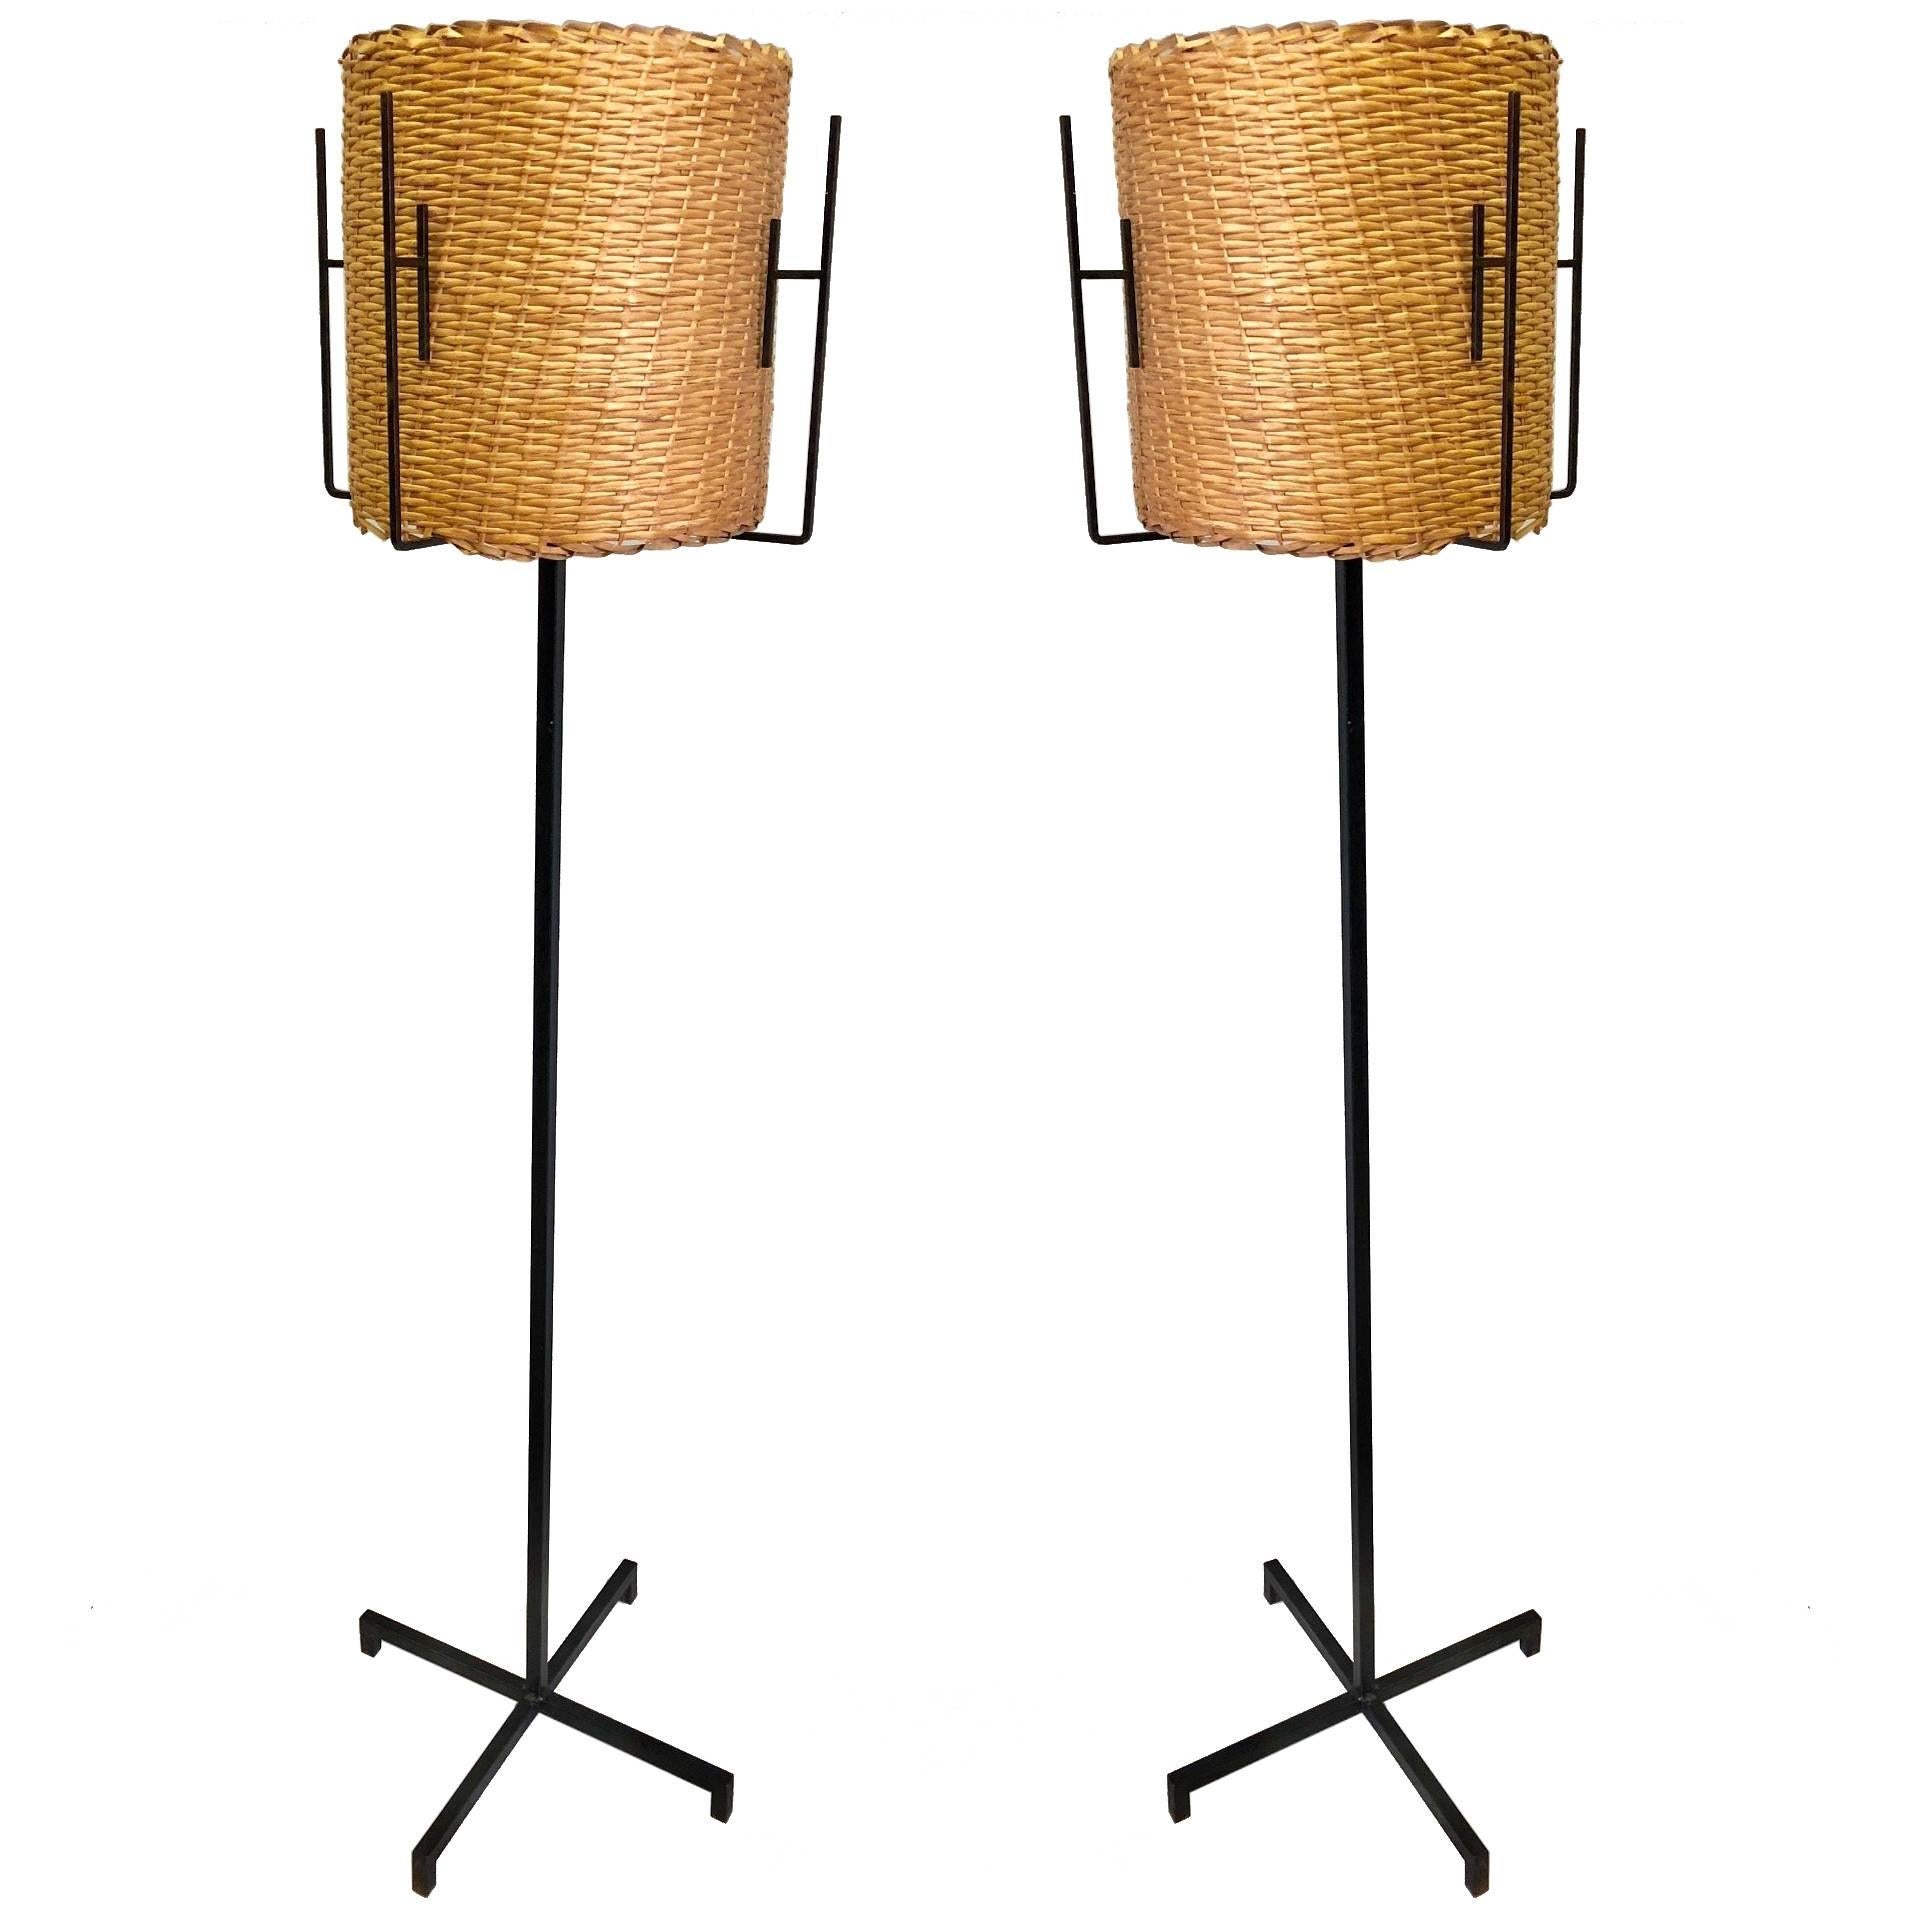 Pair of French Mid-Century Modern Wrought Iron Floor Lamps by Disderot